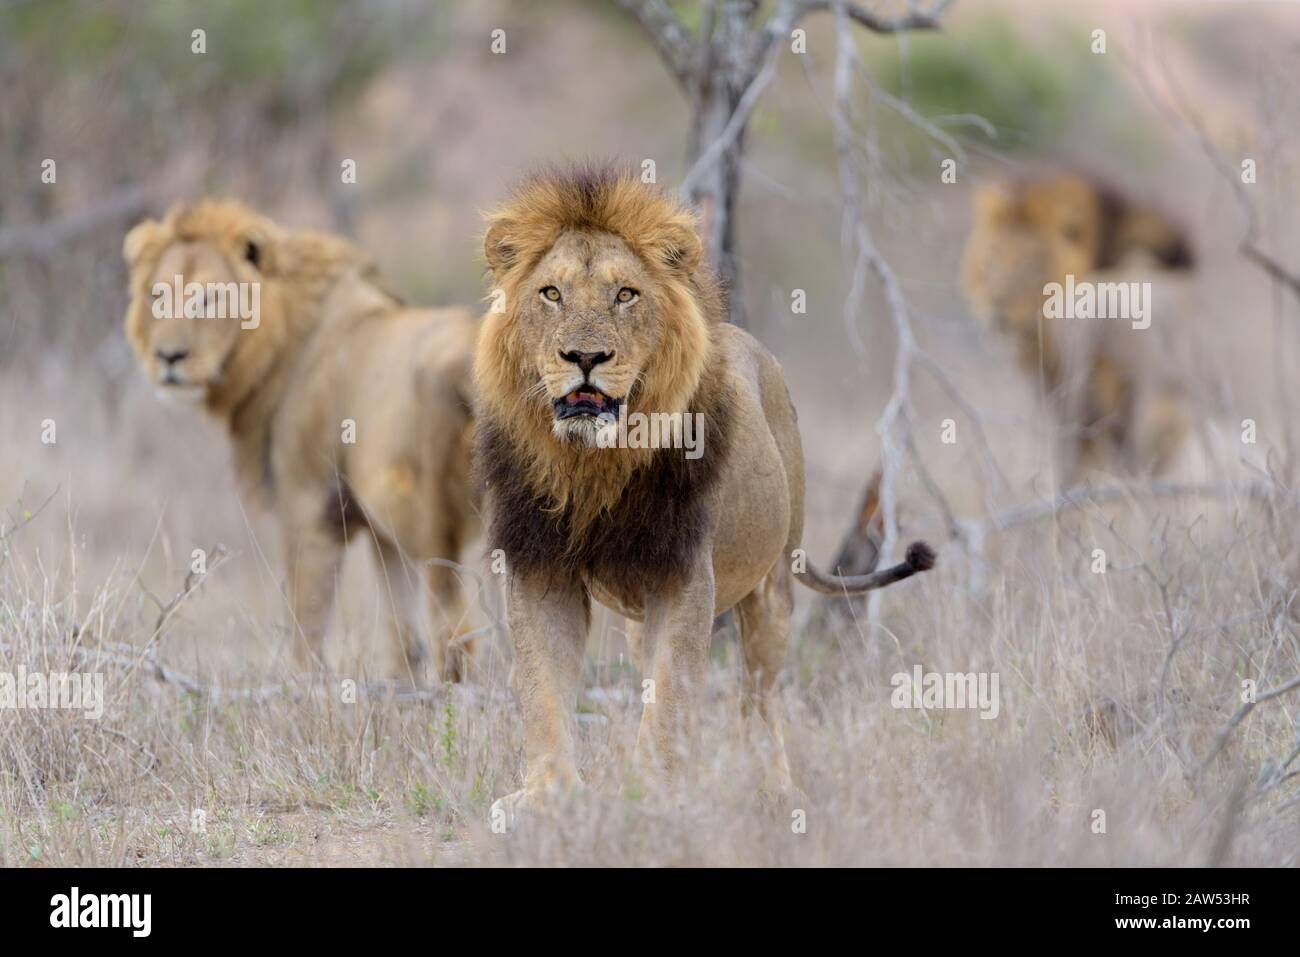 Male lion coalition in the African wilderness Stock Photo